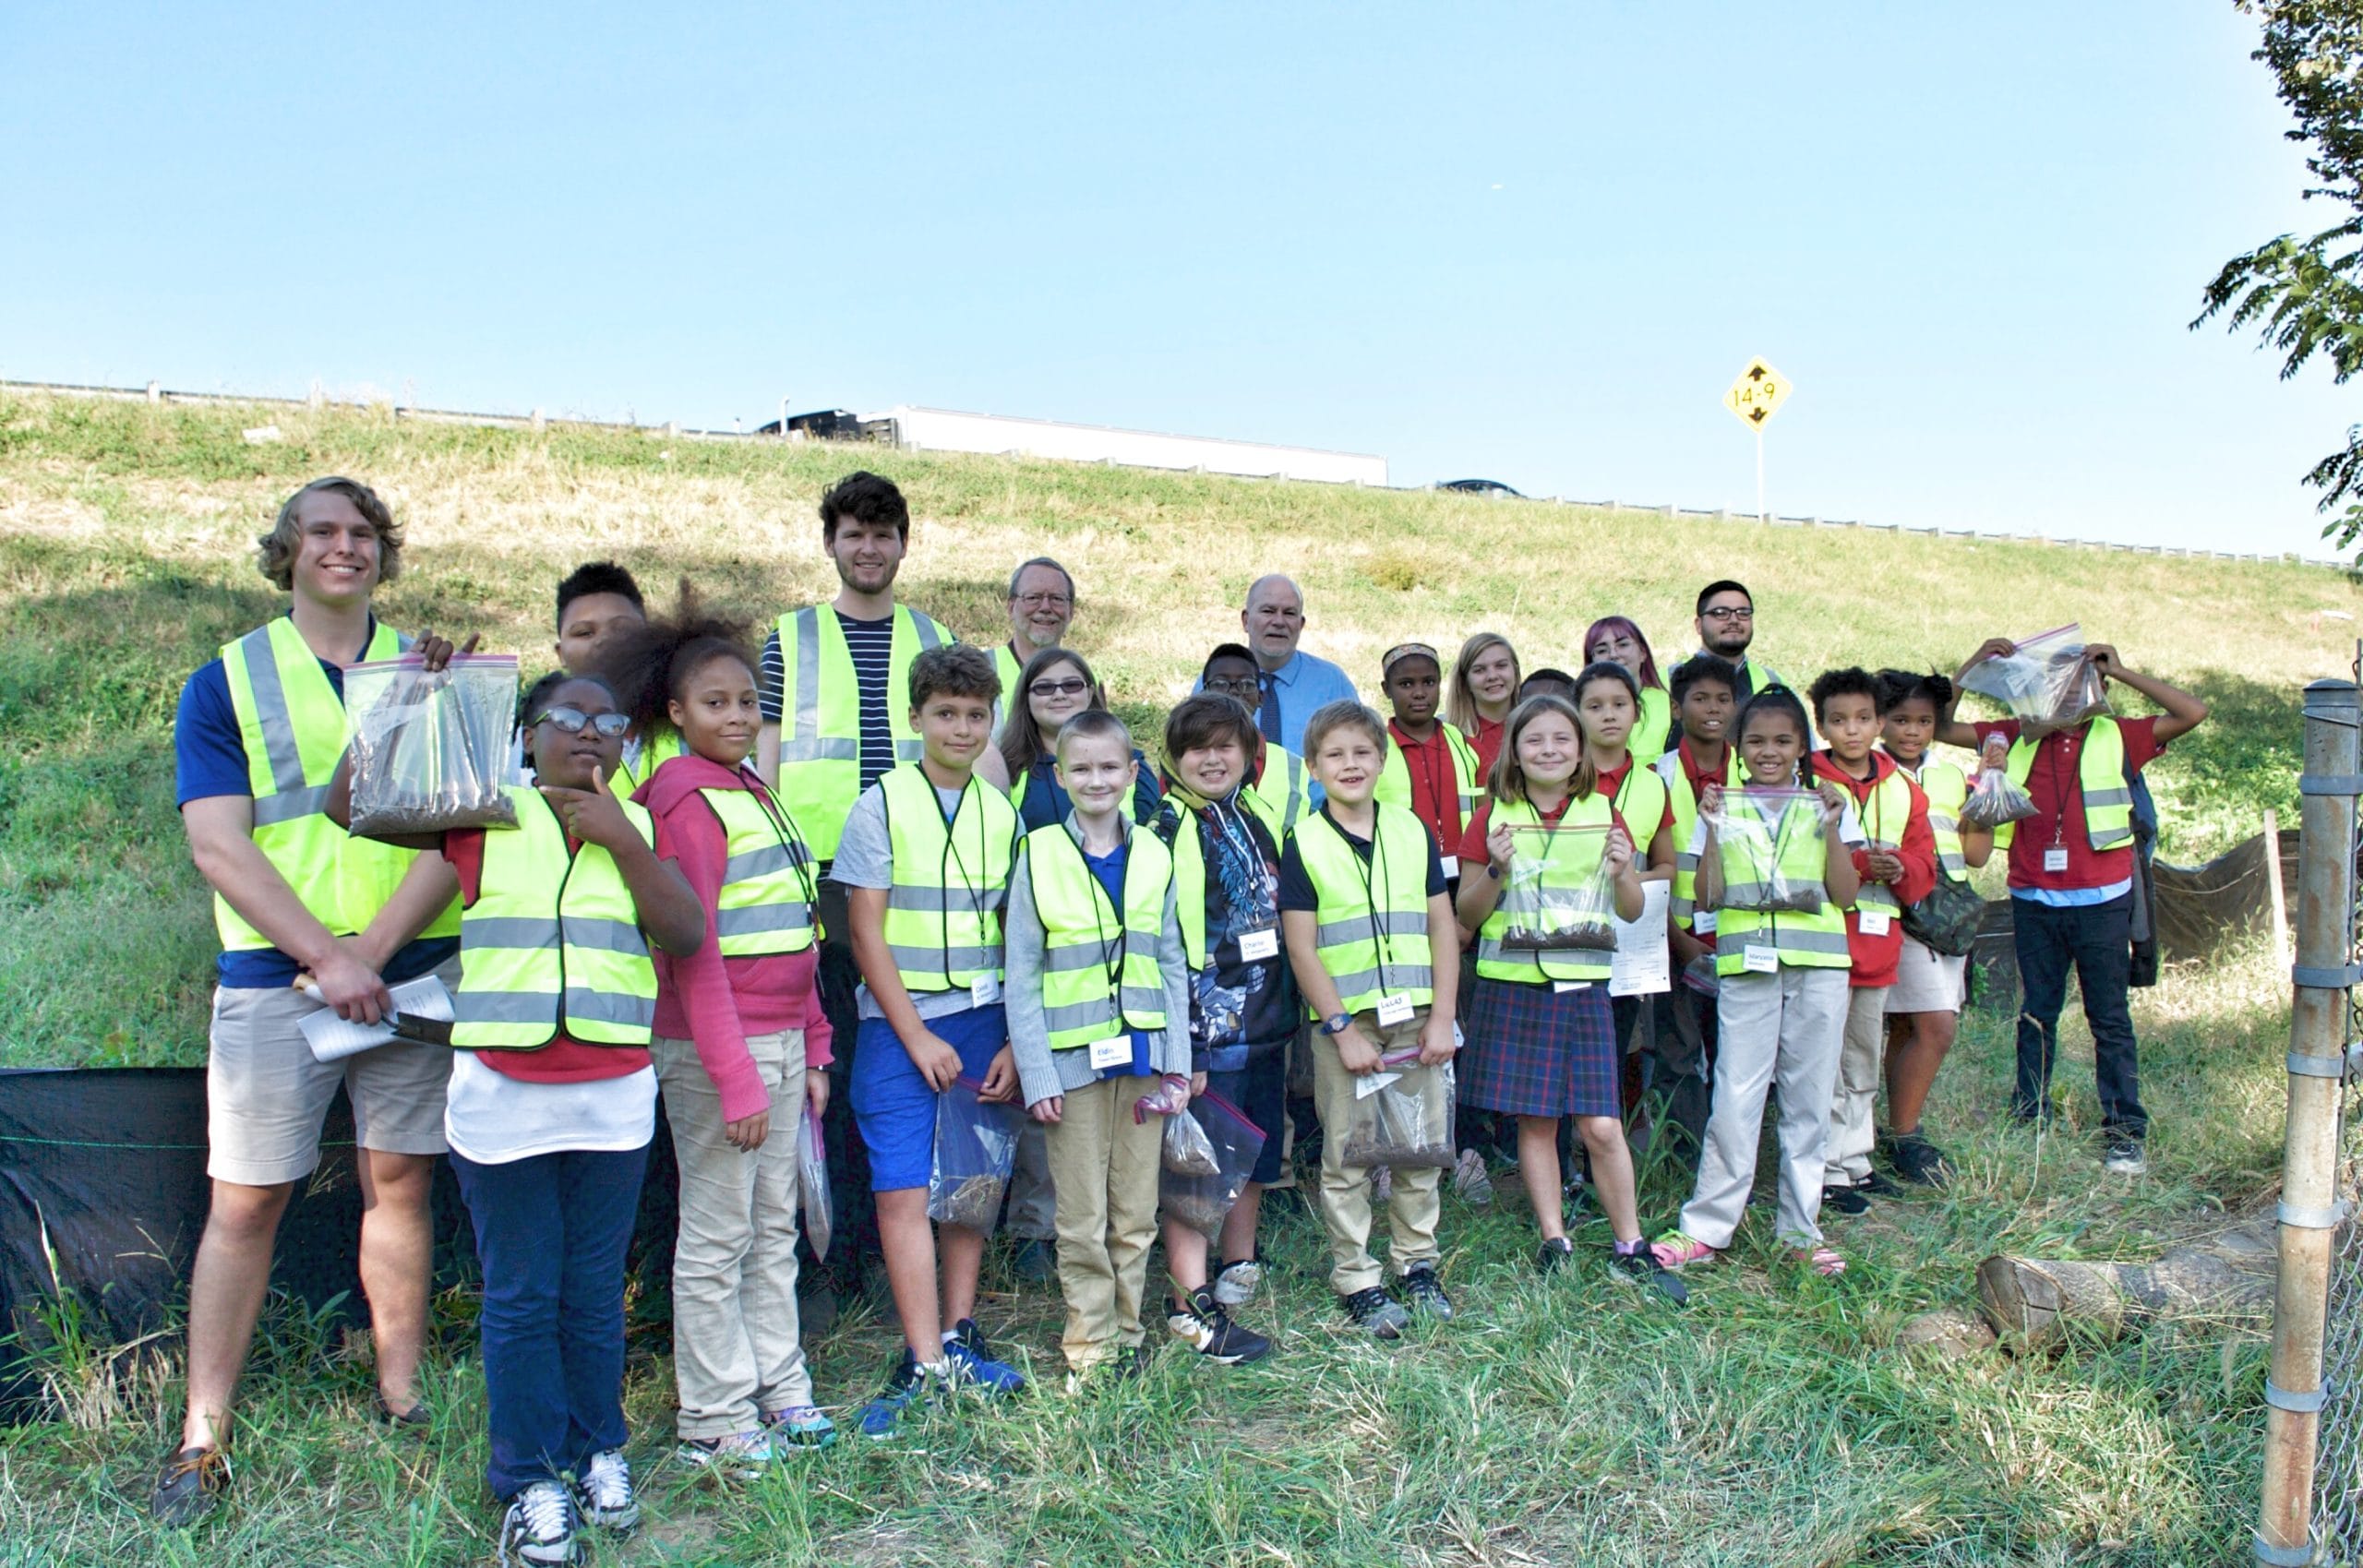 A group of students in yellow safety vests pose for the camera. The students are outdoors and holding ziploc bags of soil.